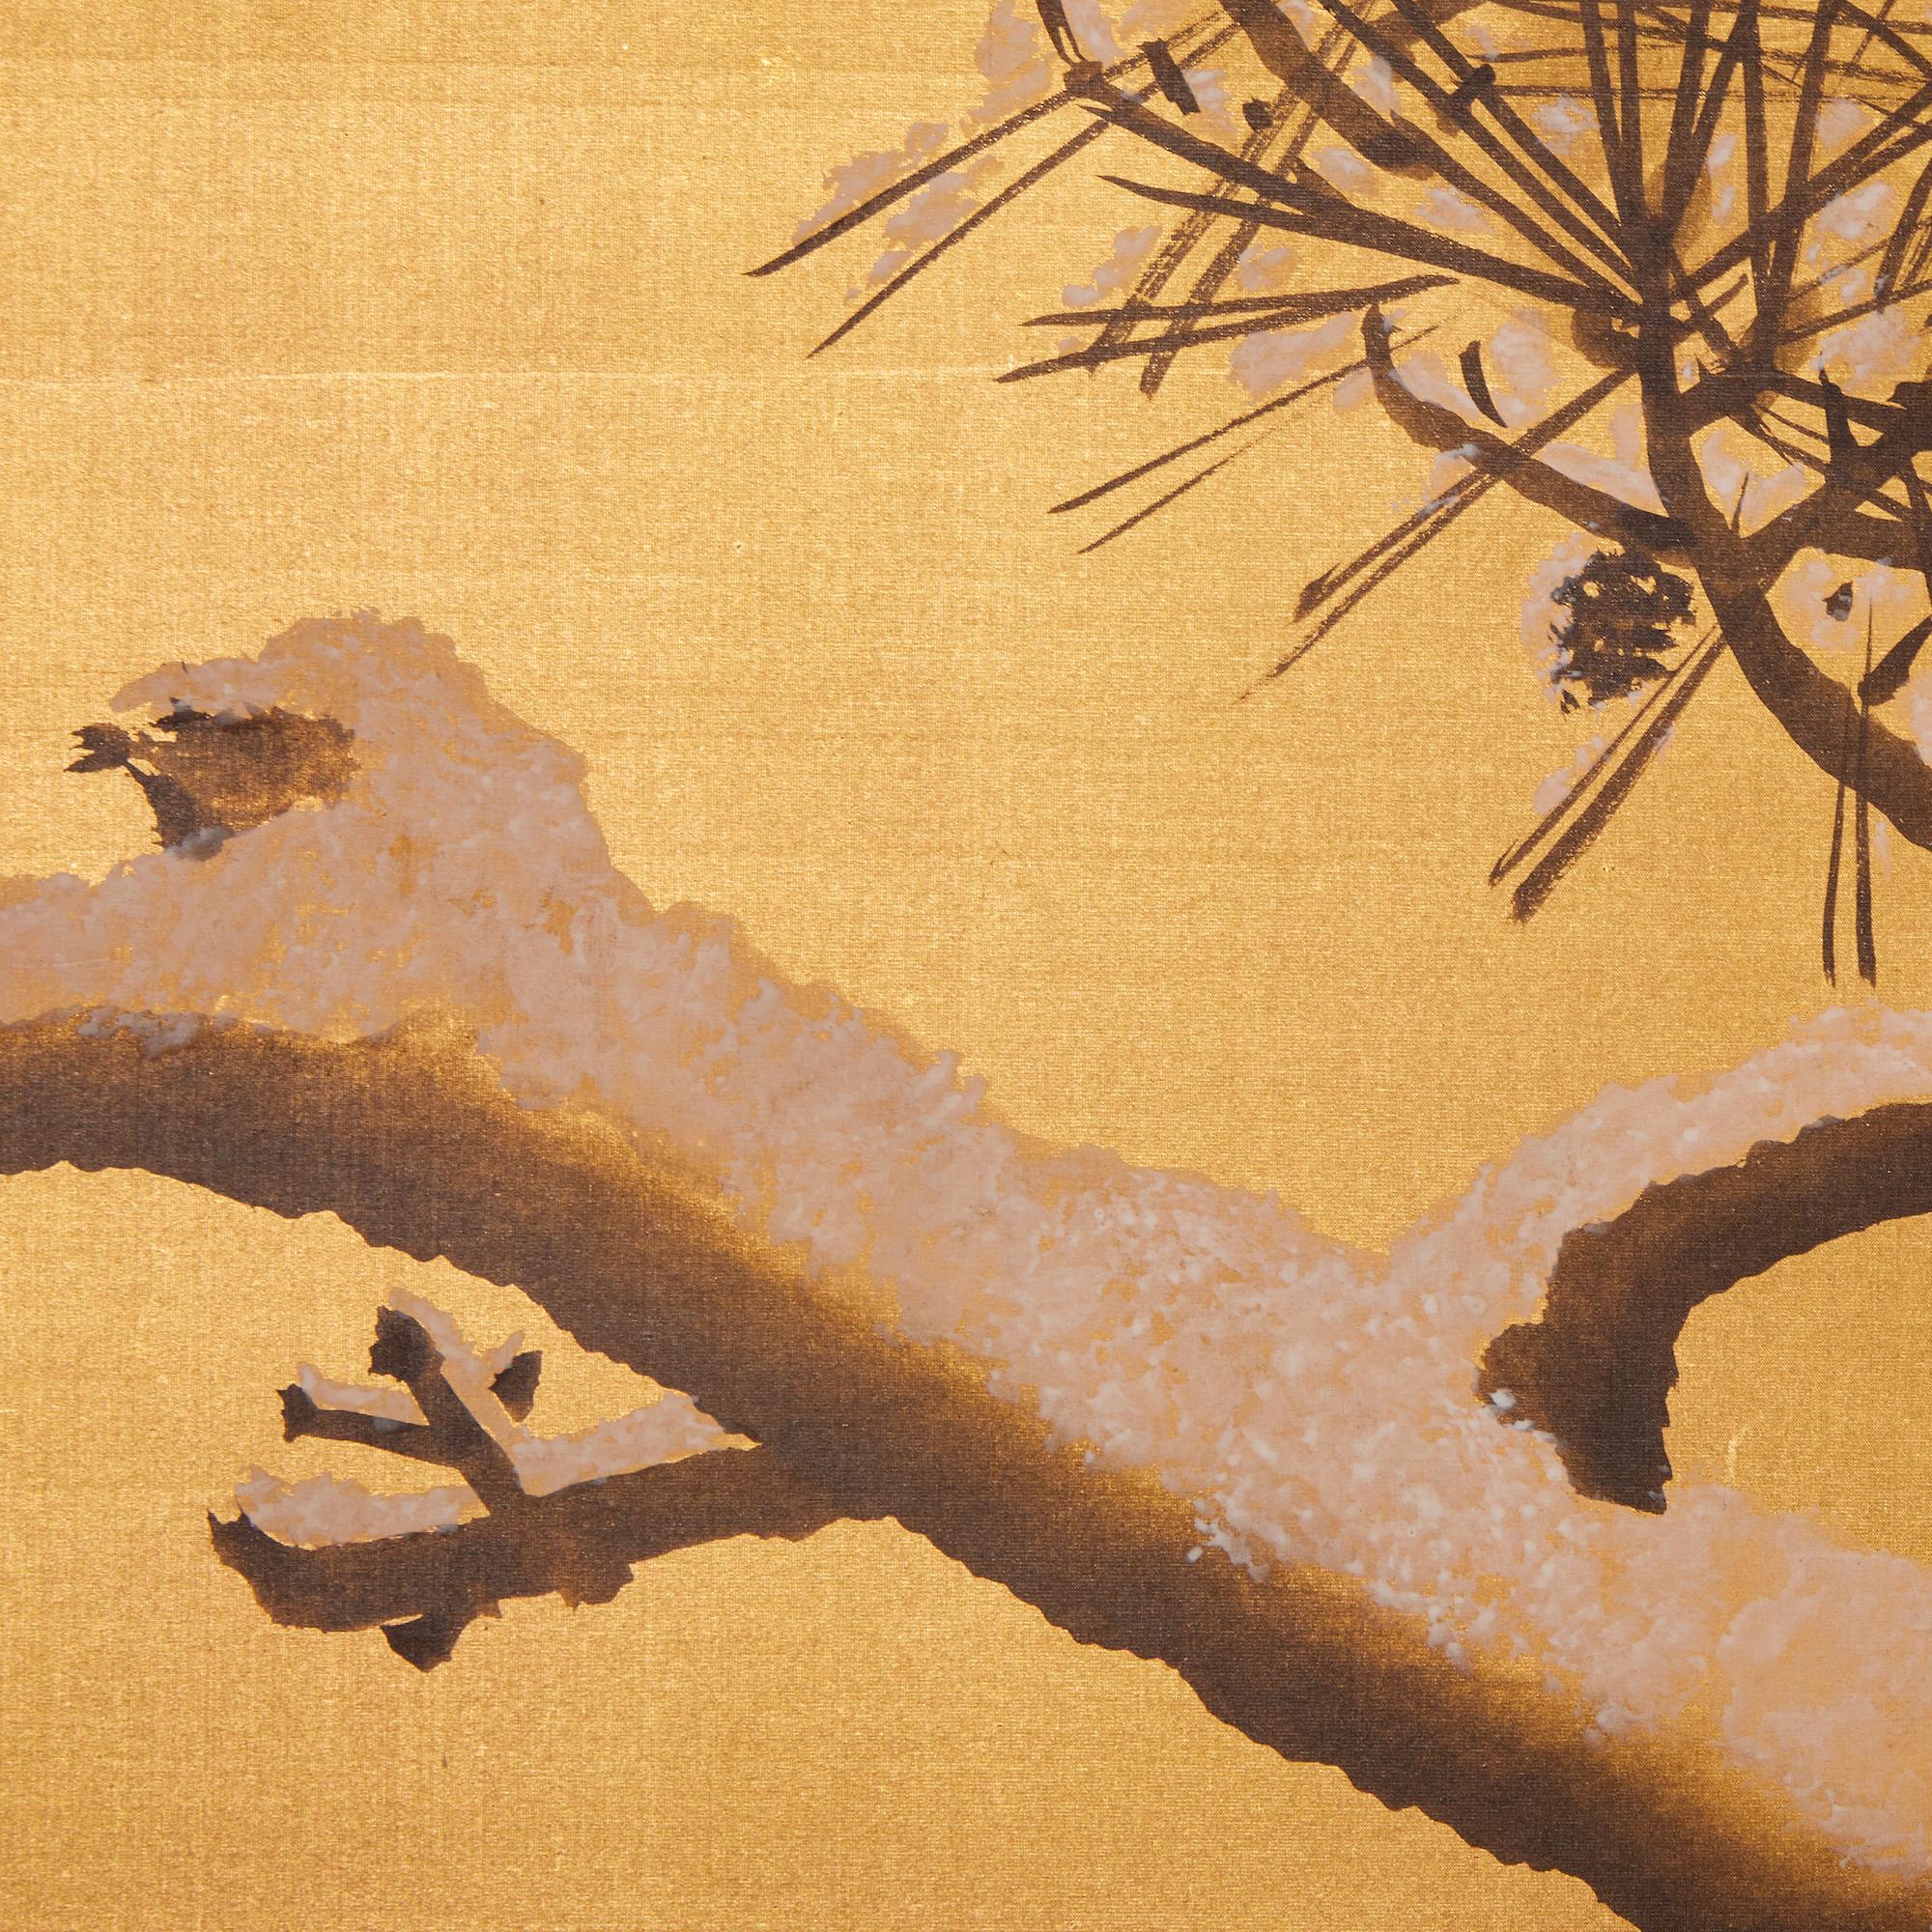 20th Century Japanese Two-Panel Screen, Maruyama Oyo’s Pine in Snow